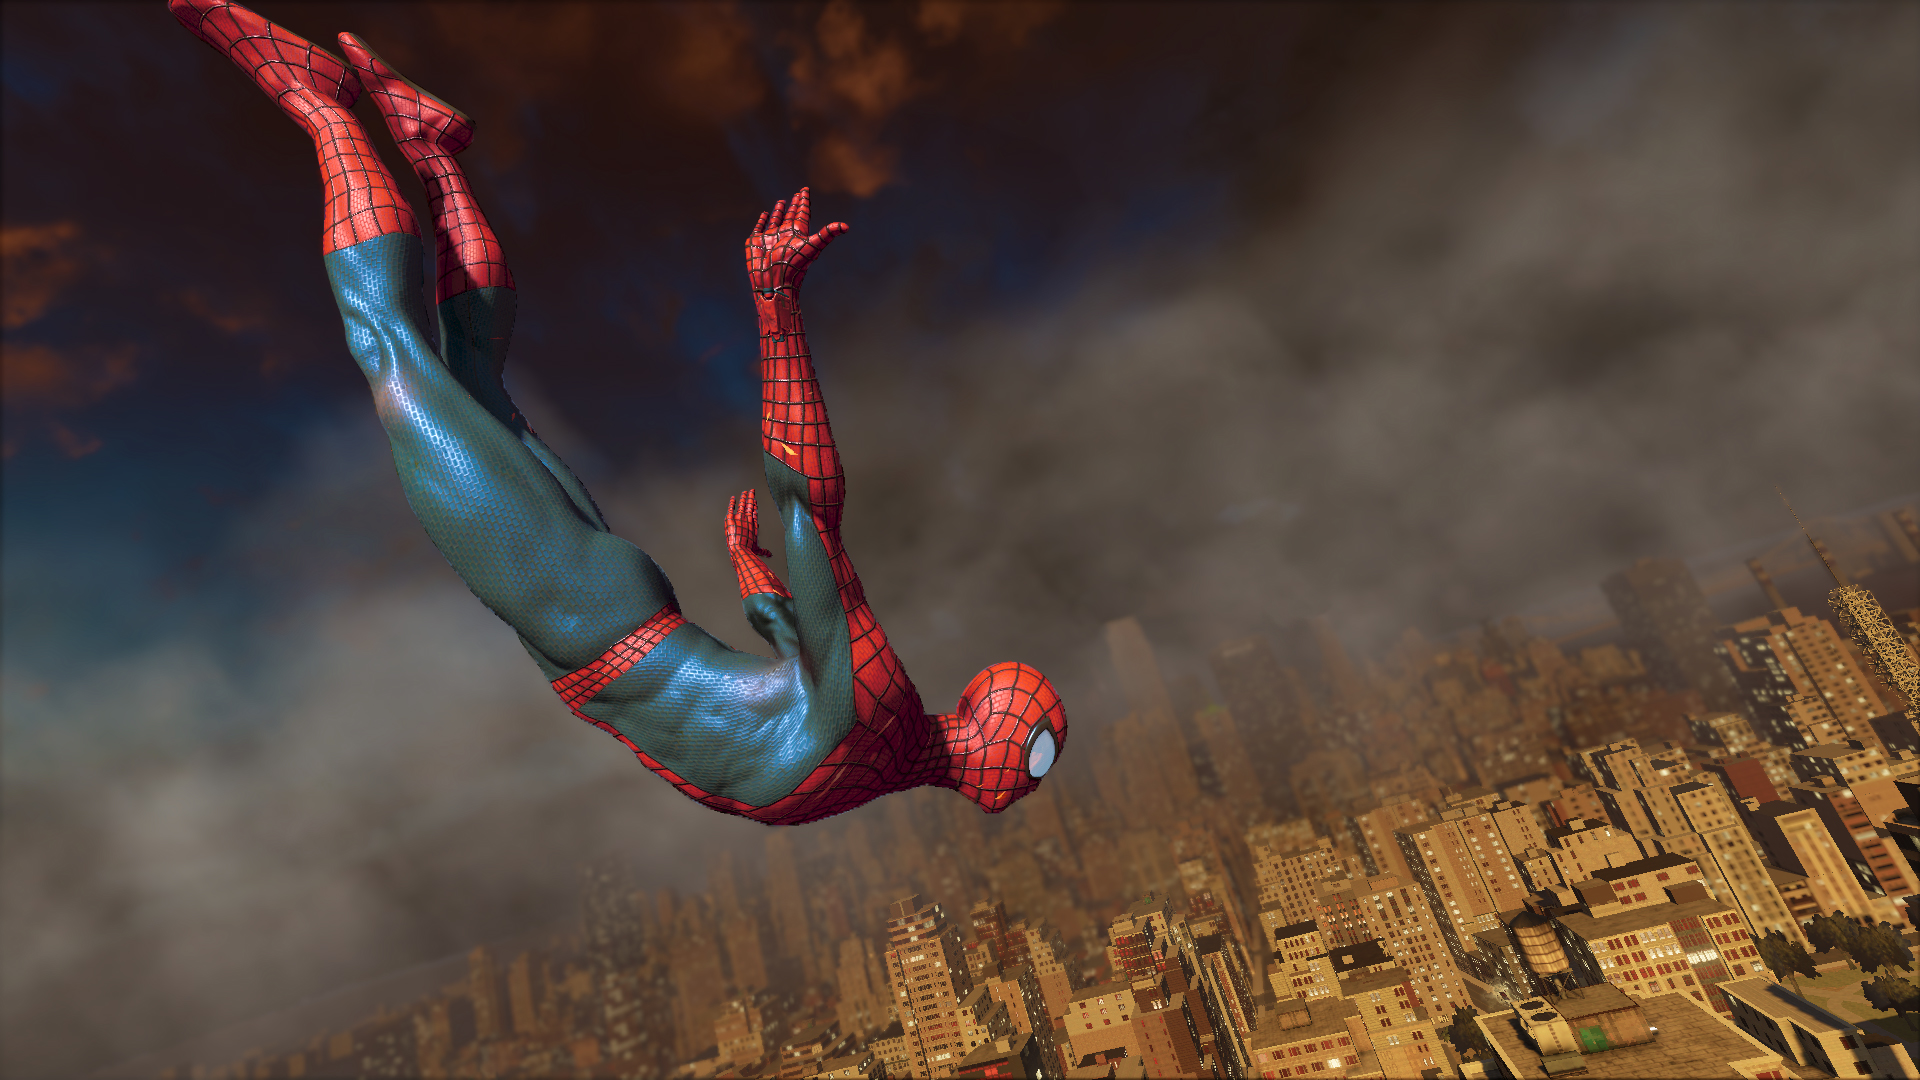 The Amazing Spiderman 2 (PS3) - image 2 of 10